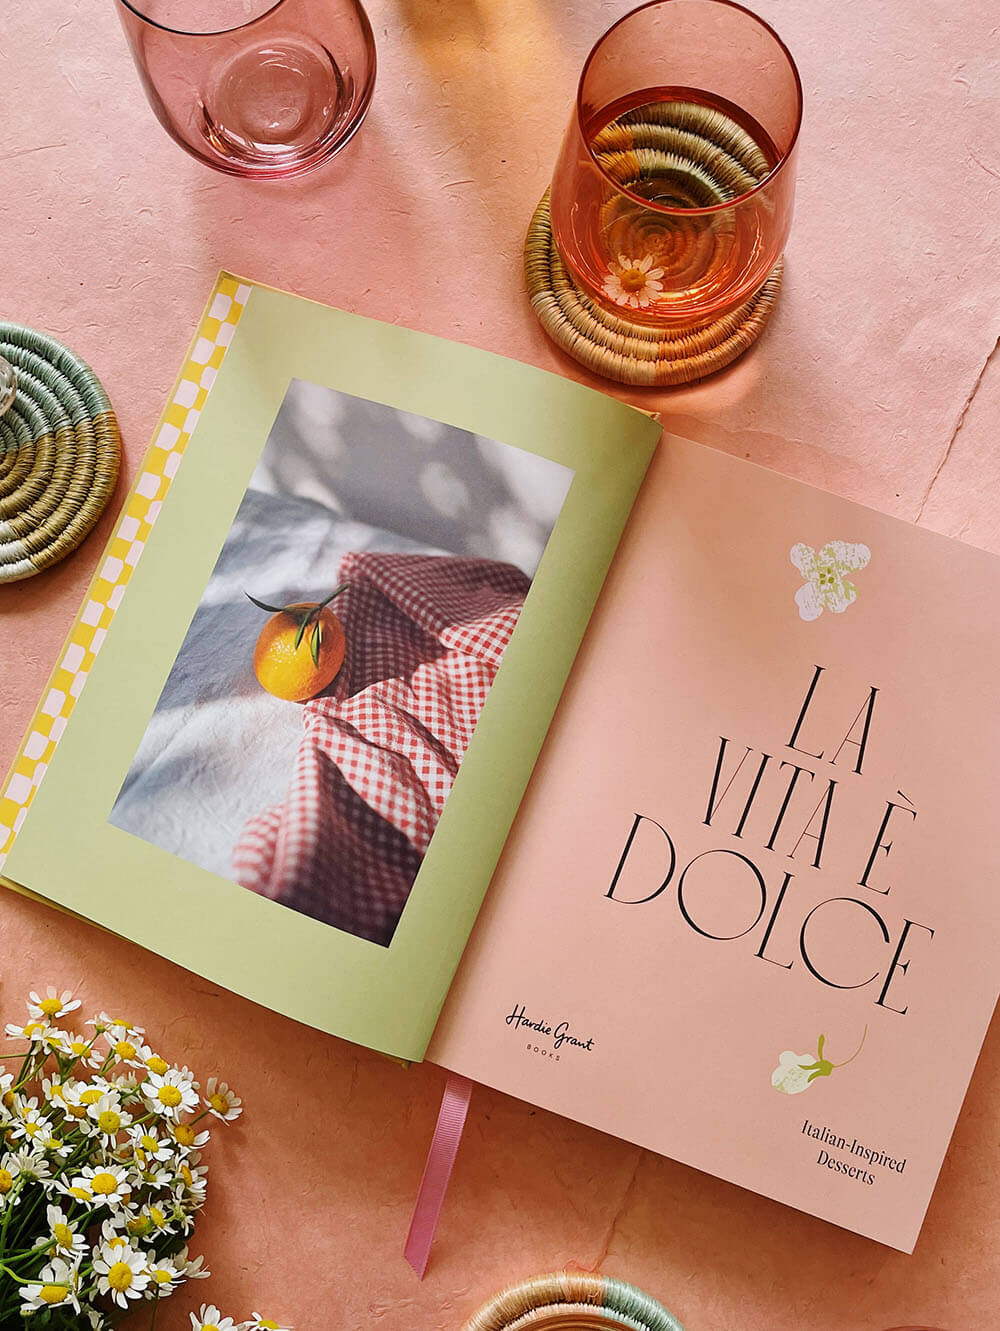 pretty coffee table books - the making of wallflower shop 